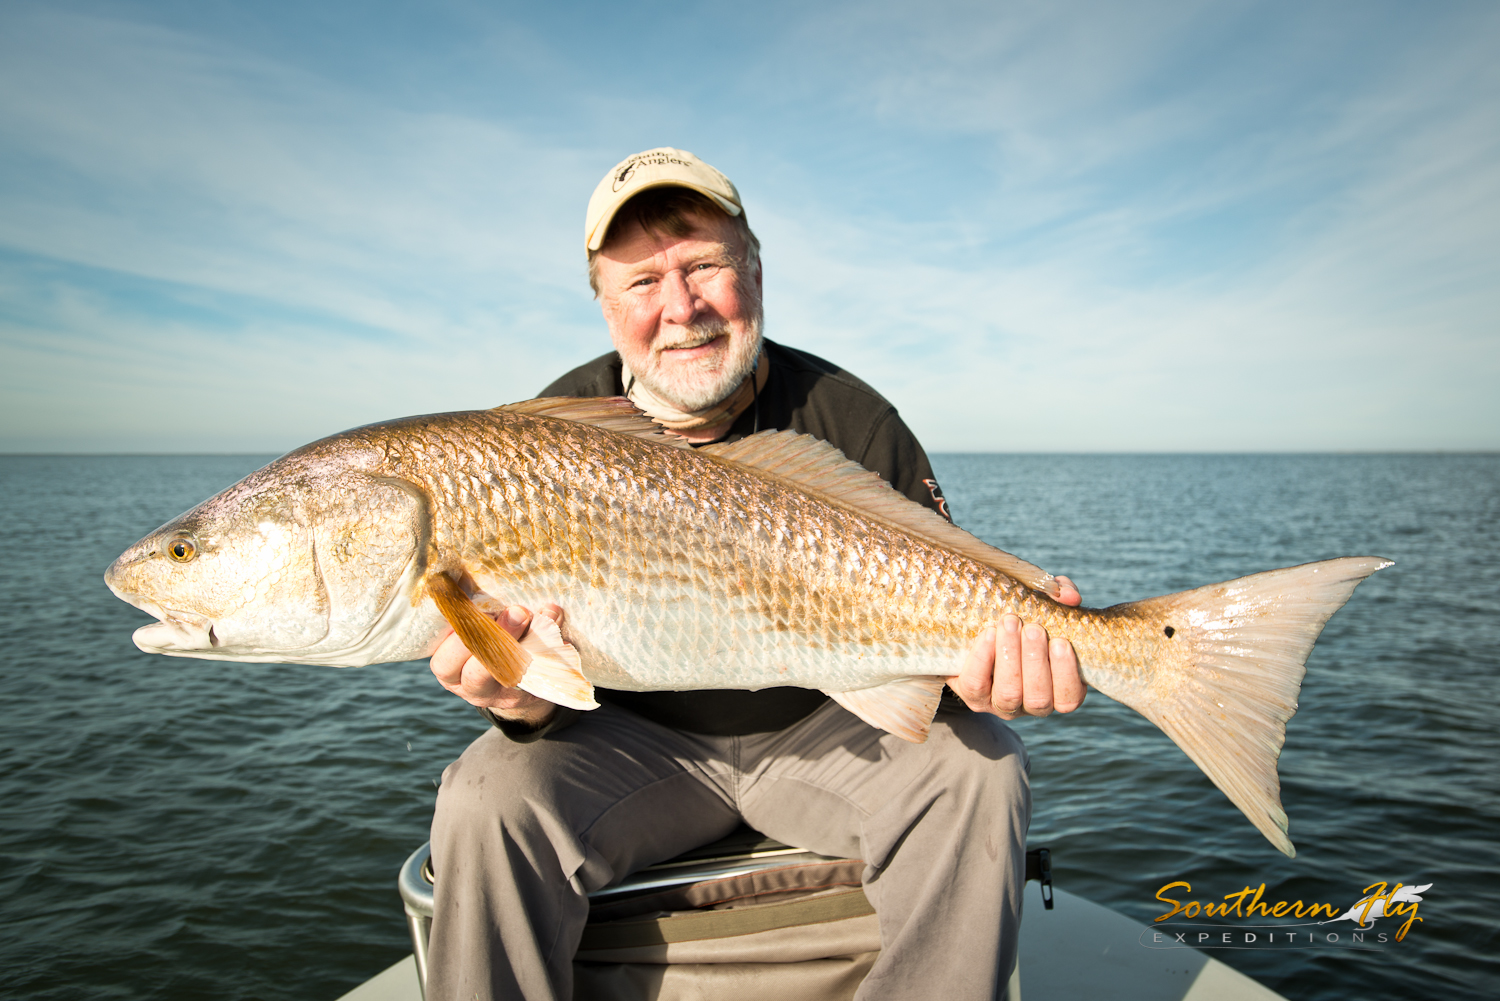 Fishing guides in Louisiana - Southern Fly Expeditions fly fishing for redfish